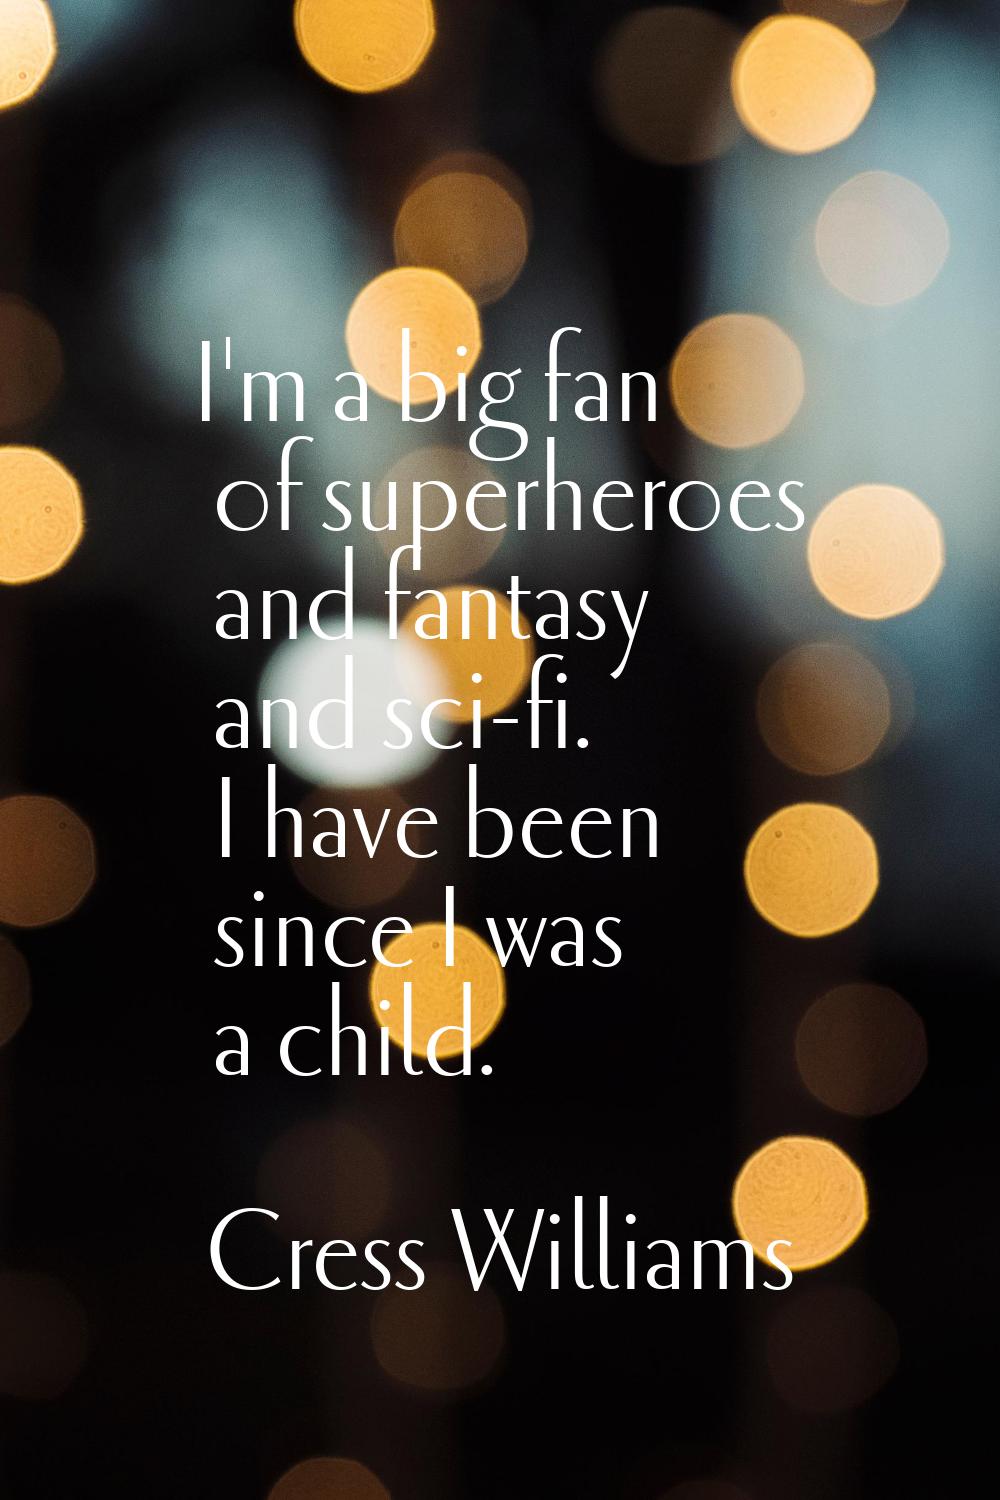 I'm a big fan of superheroes and fantasy and sci-fi. I have been since I was a child.